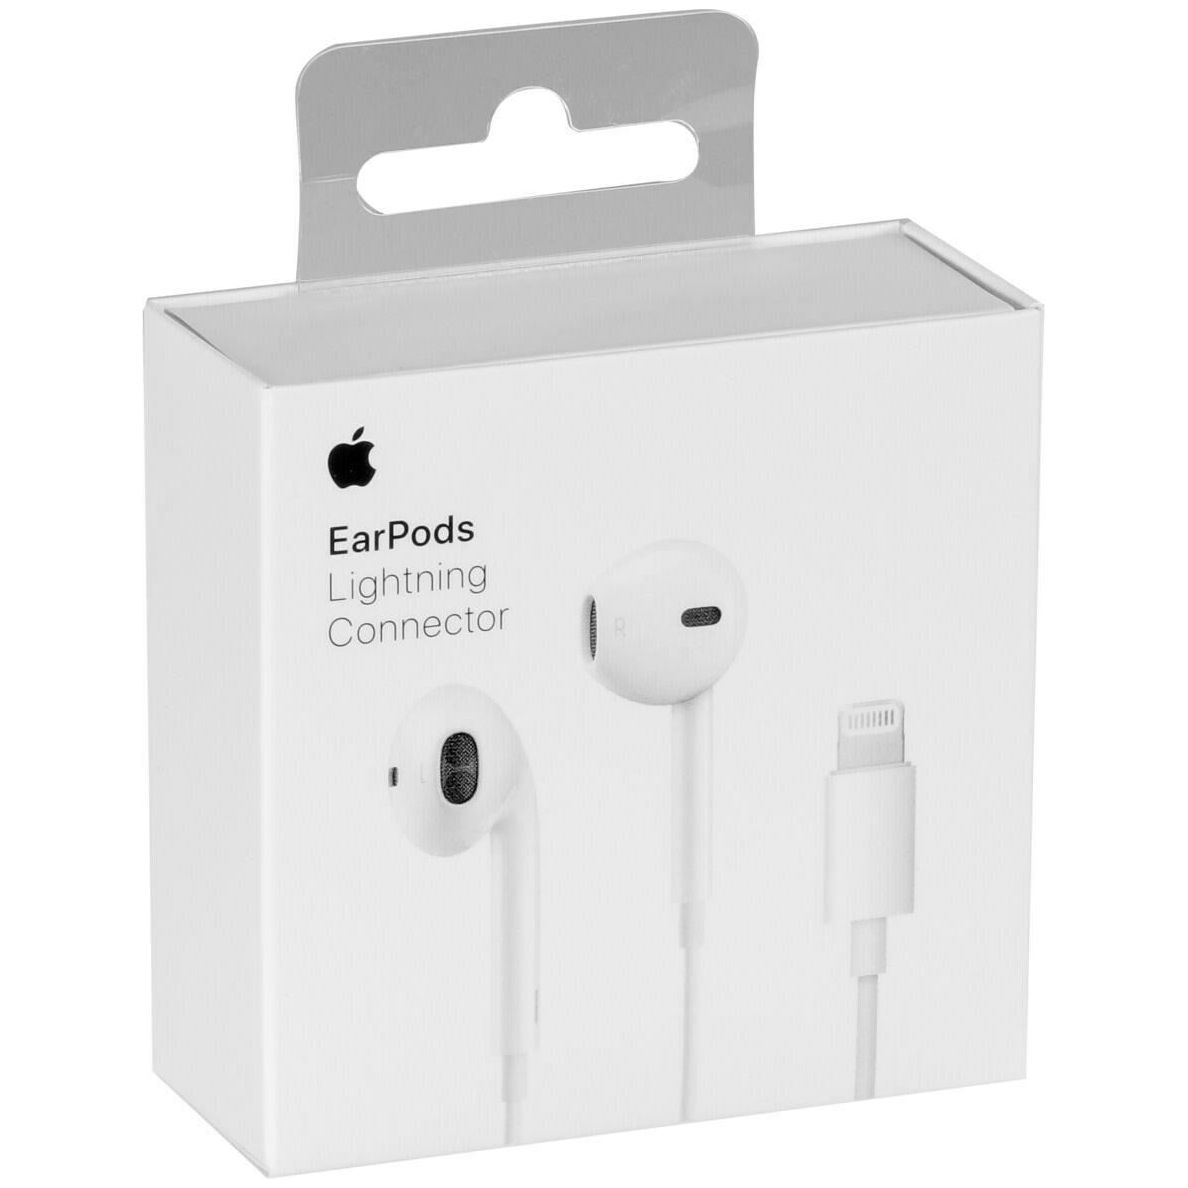 URBAN SOUND GEAR - IPHONE EARBUDS WITH LIGHTNING CONNECTOR MFI CERTIFIED BY APPLE EARPHONES WIRED.